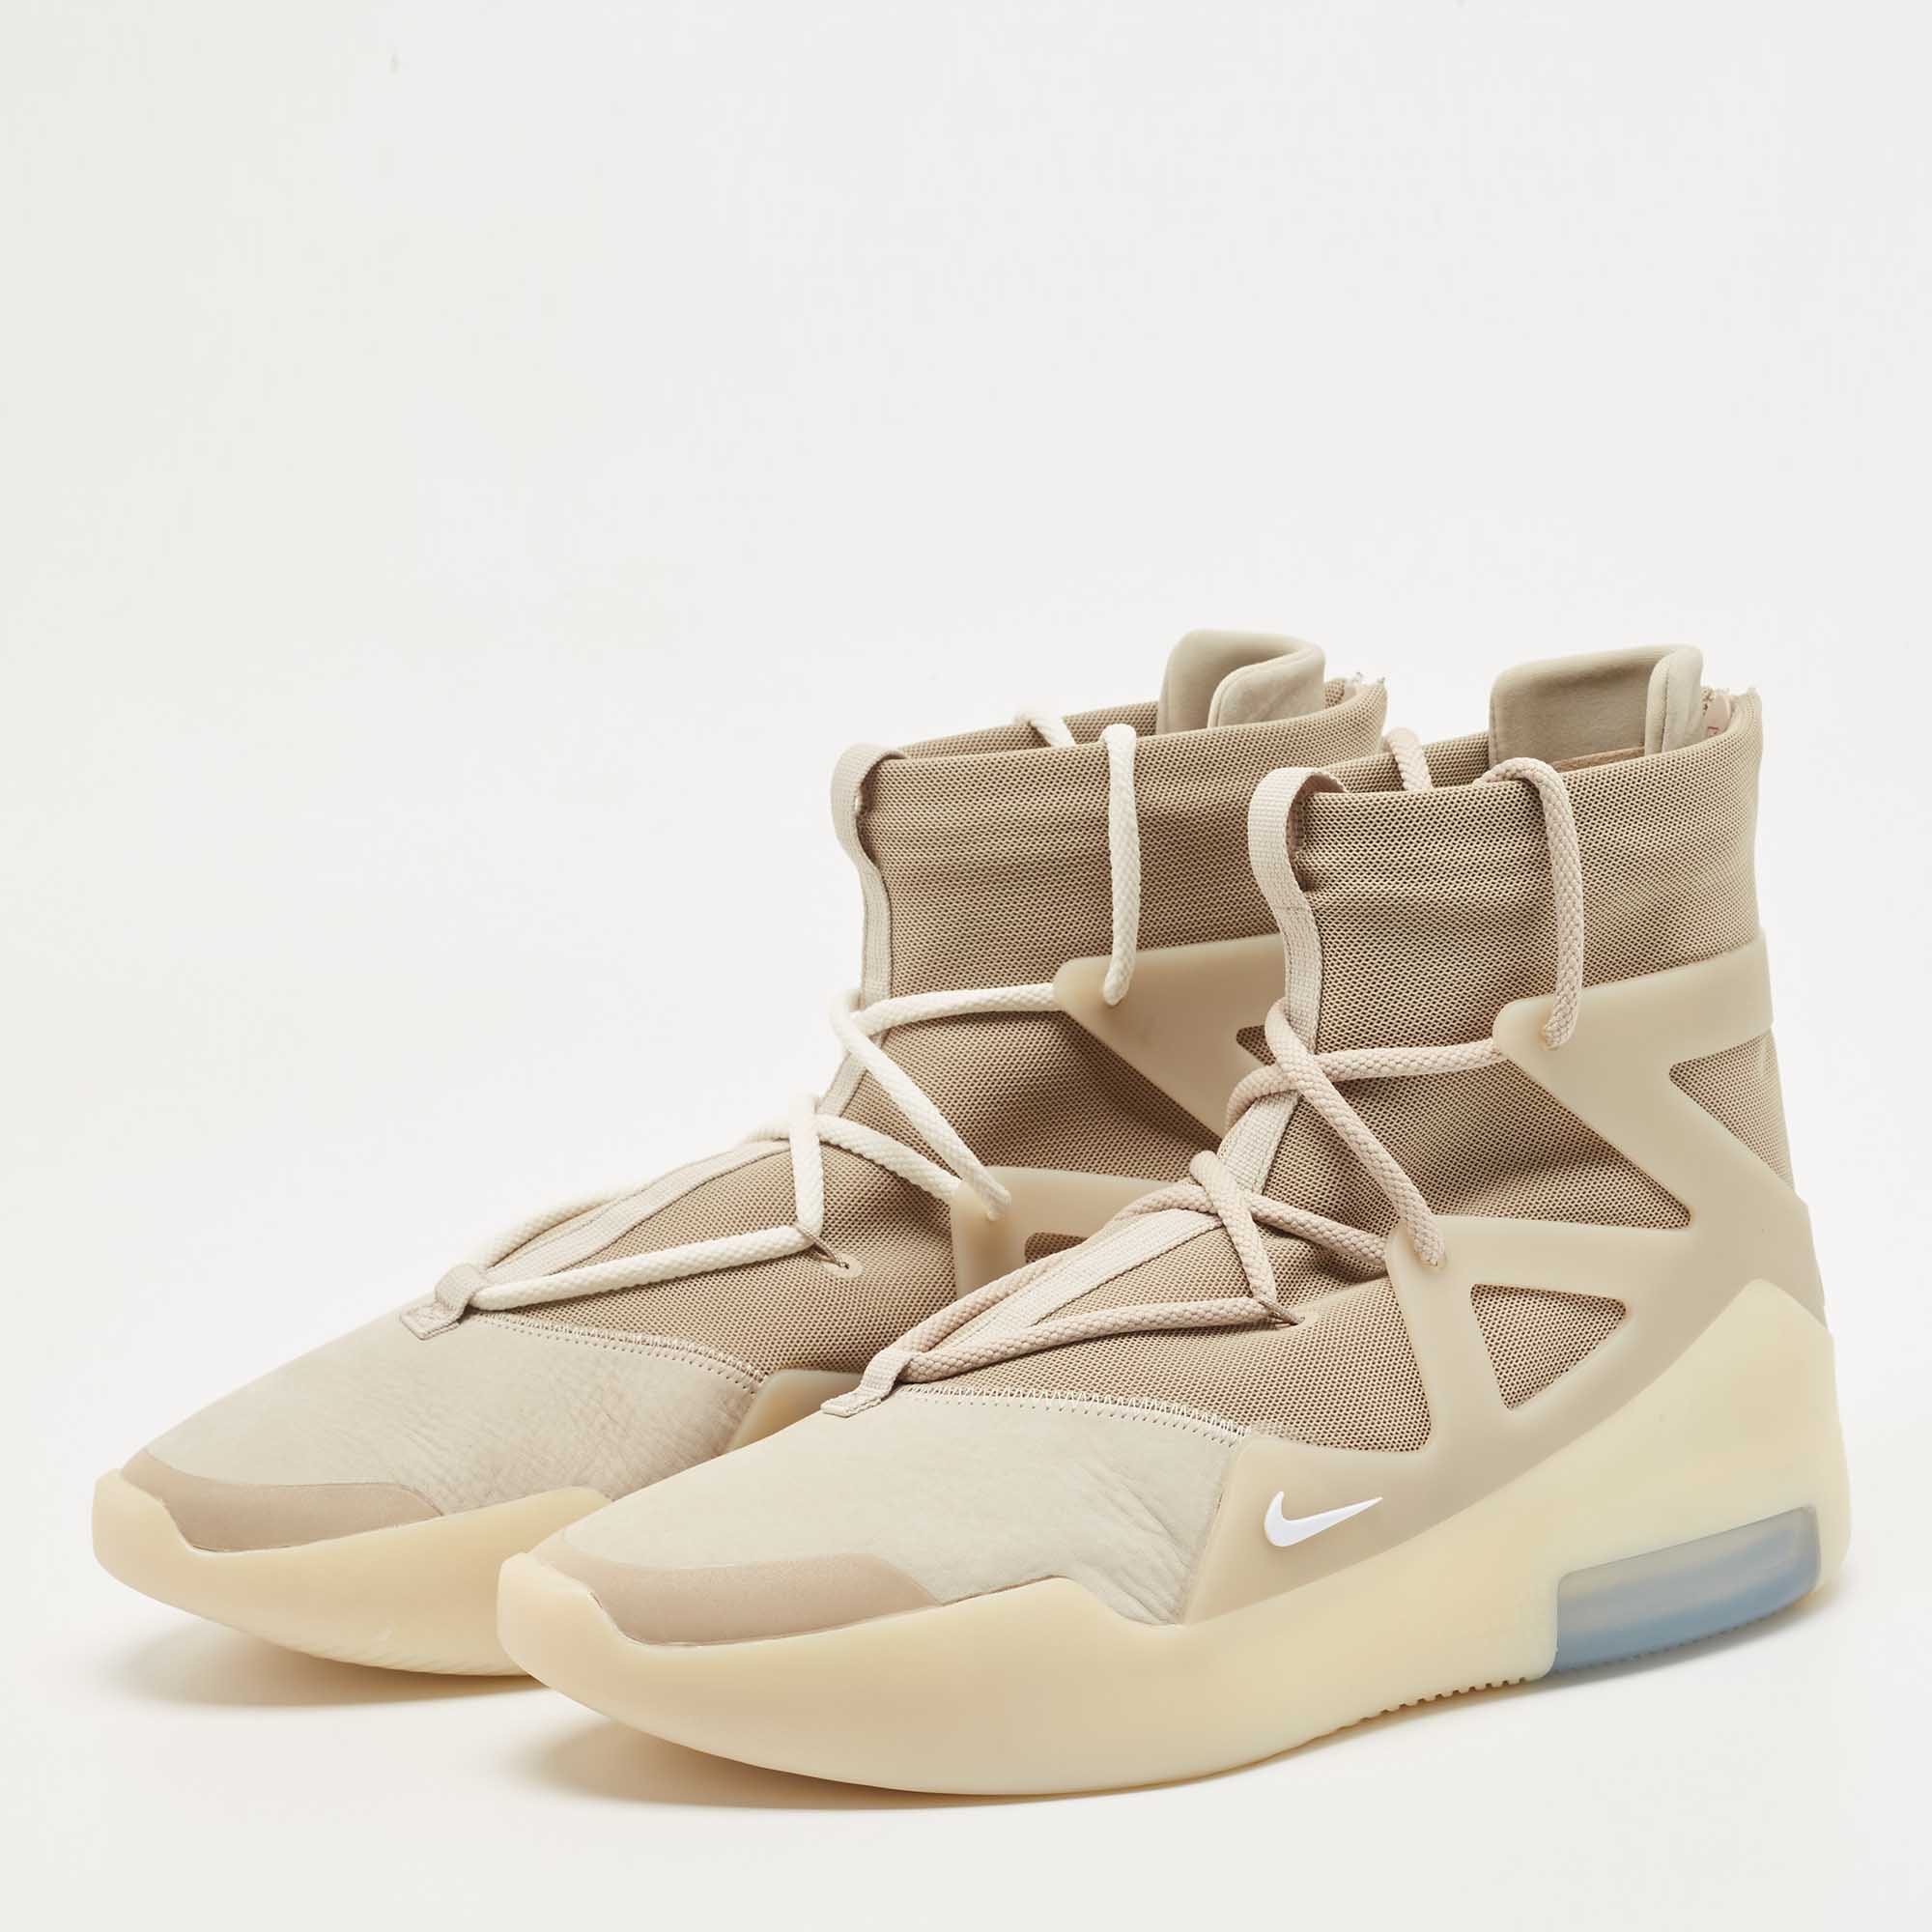 

Fear of God x Nike Cream Rubber and Nubuck High Top Sneakers Size